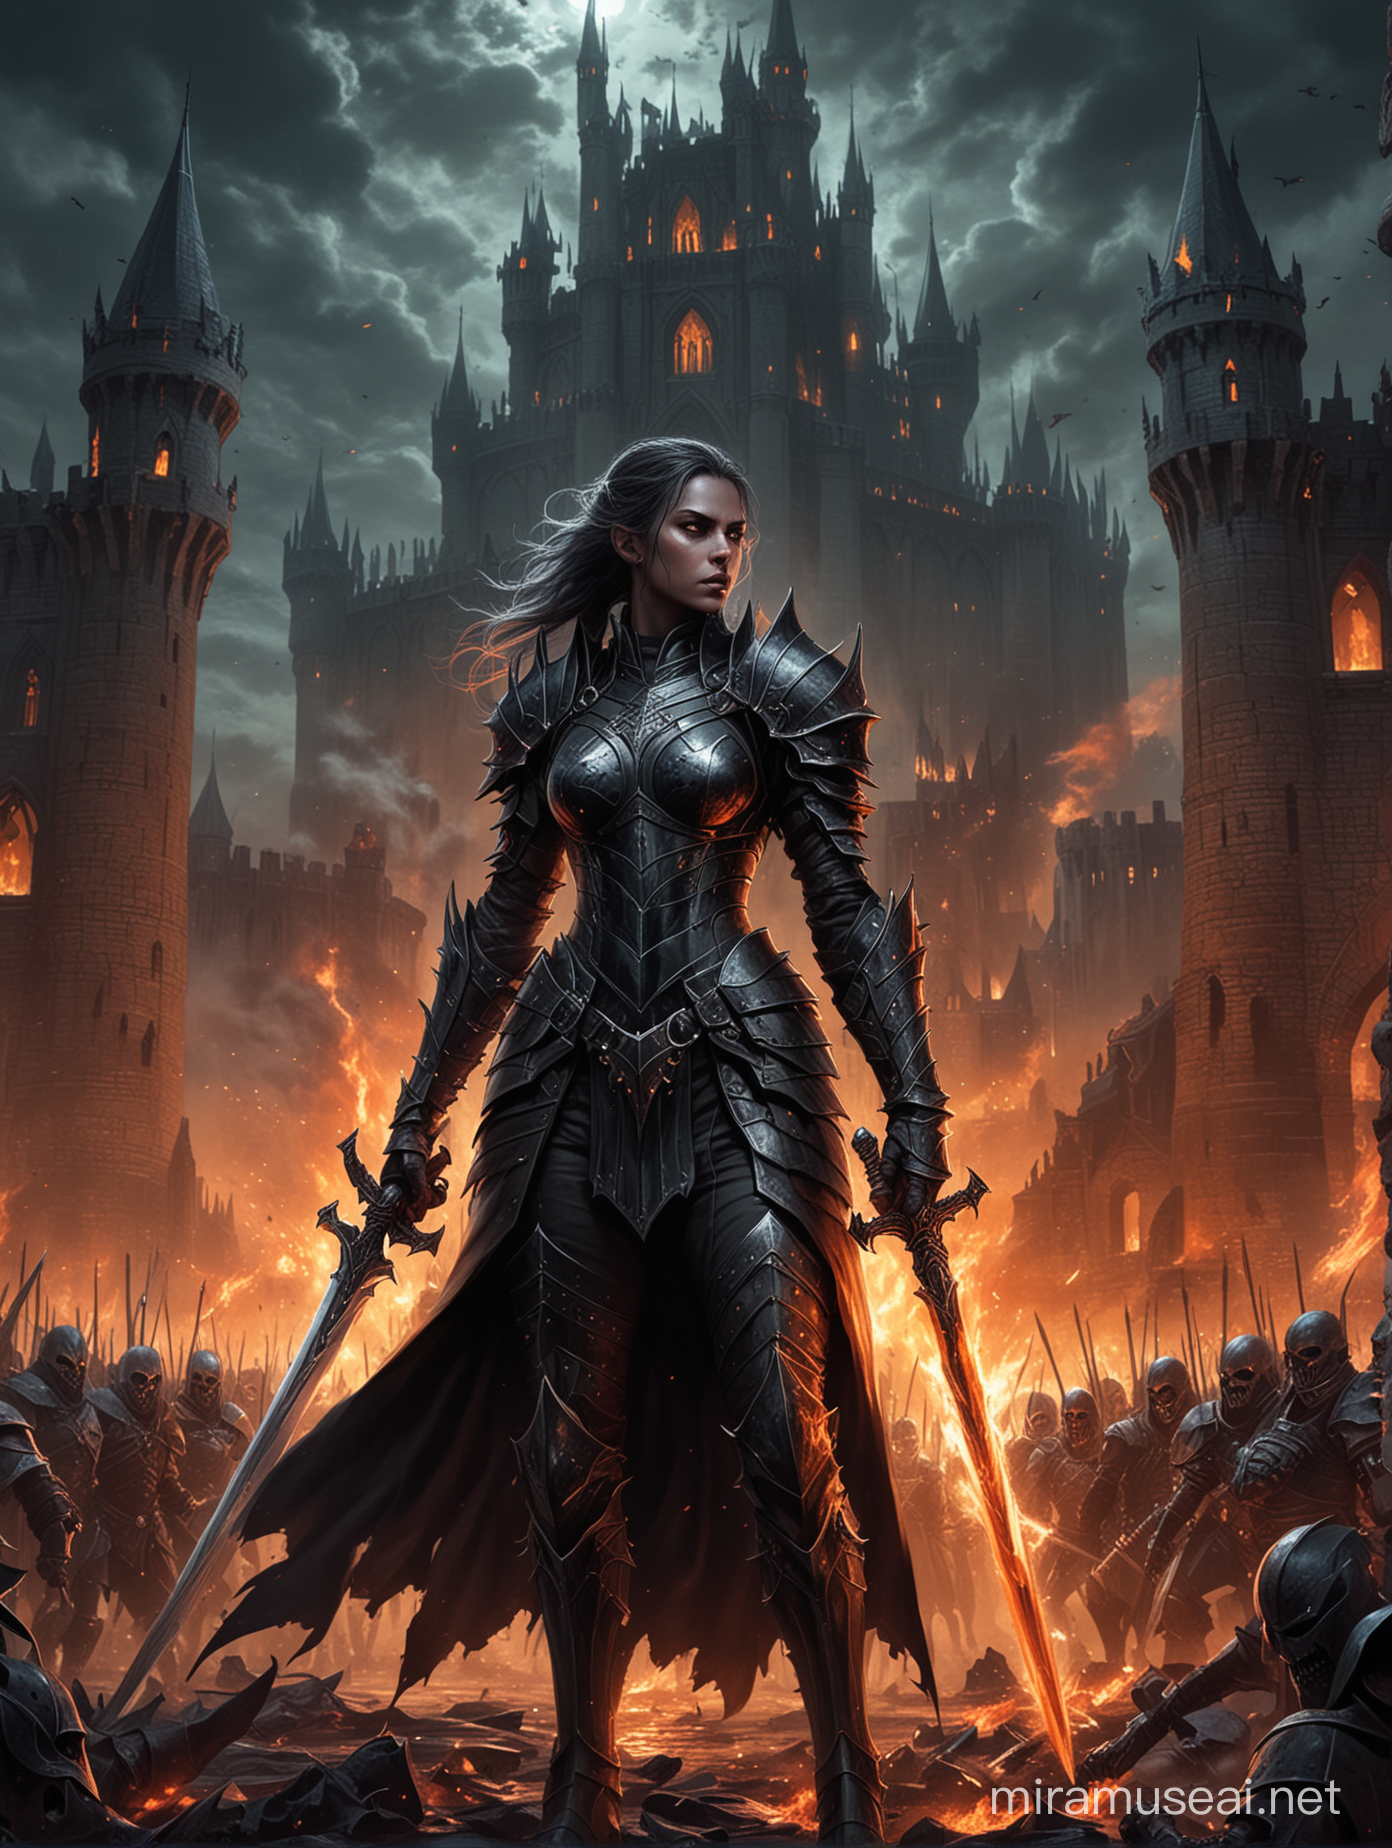 An elf female black knight. She's wearing a black armor and wield a flaming black long sword. She looks enraged. She's standing in front of a gothic fortress by night and is surrounded by an army of undead.